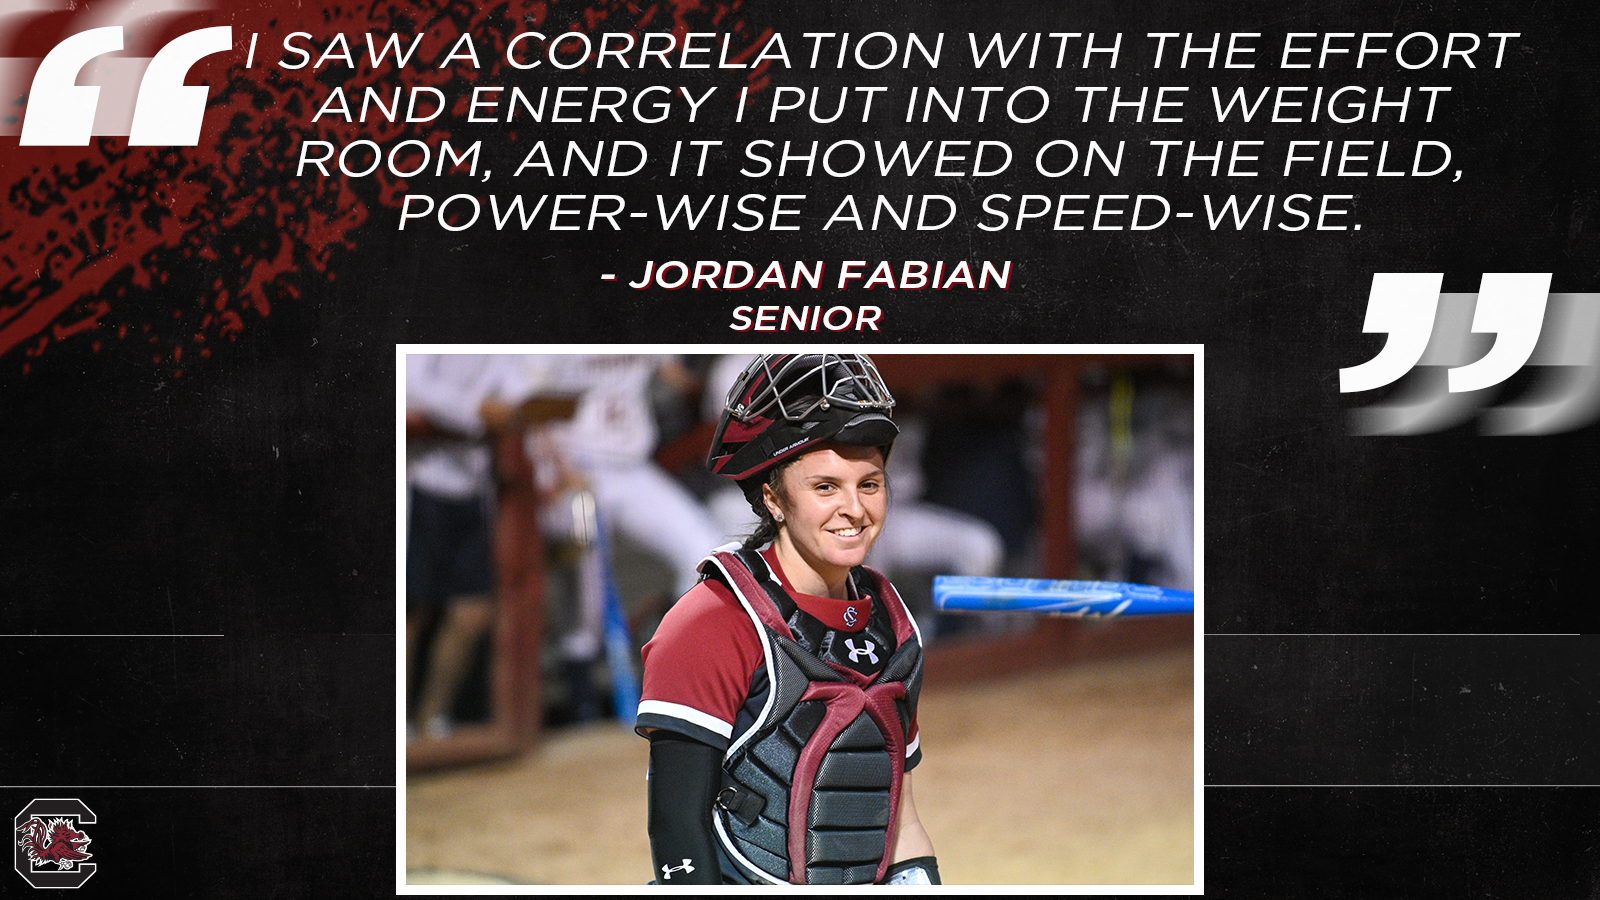 Becoming More of a Morning Person Helps Fabian Excel On and Off the Field